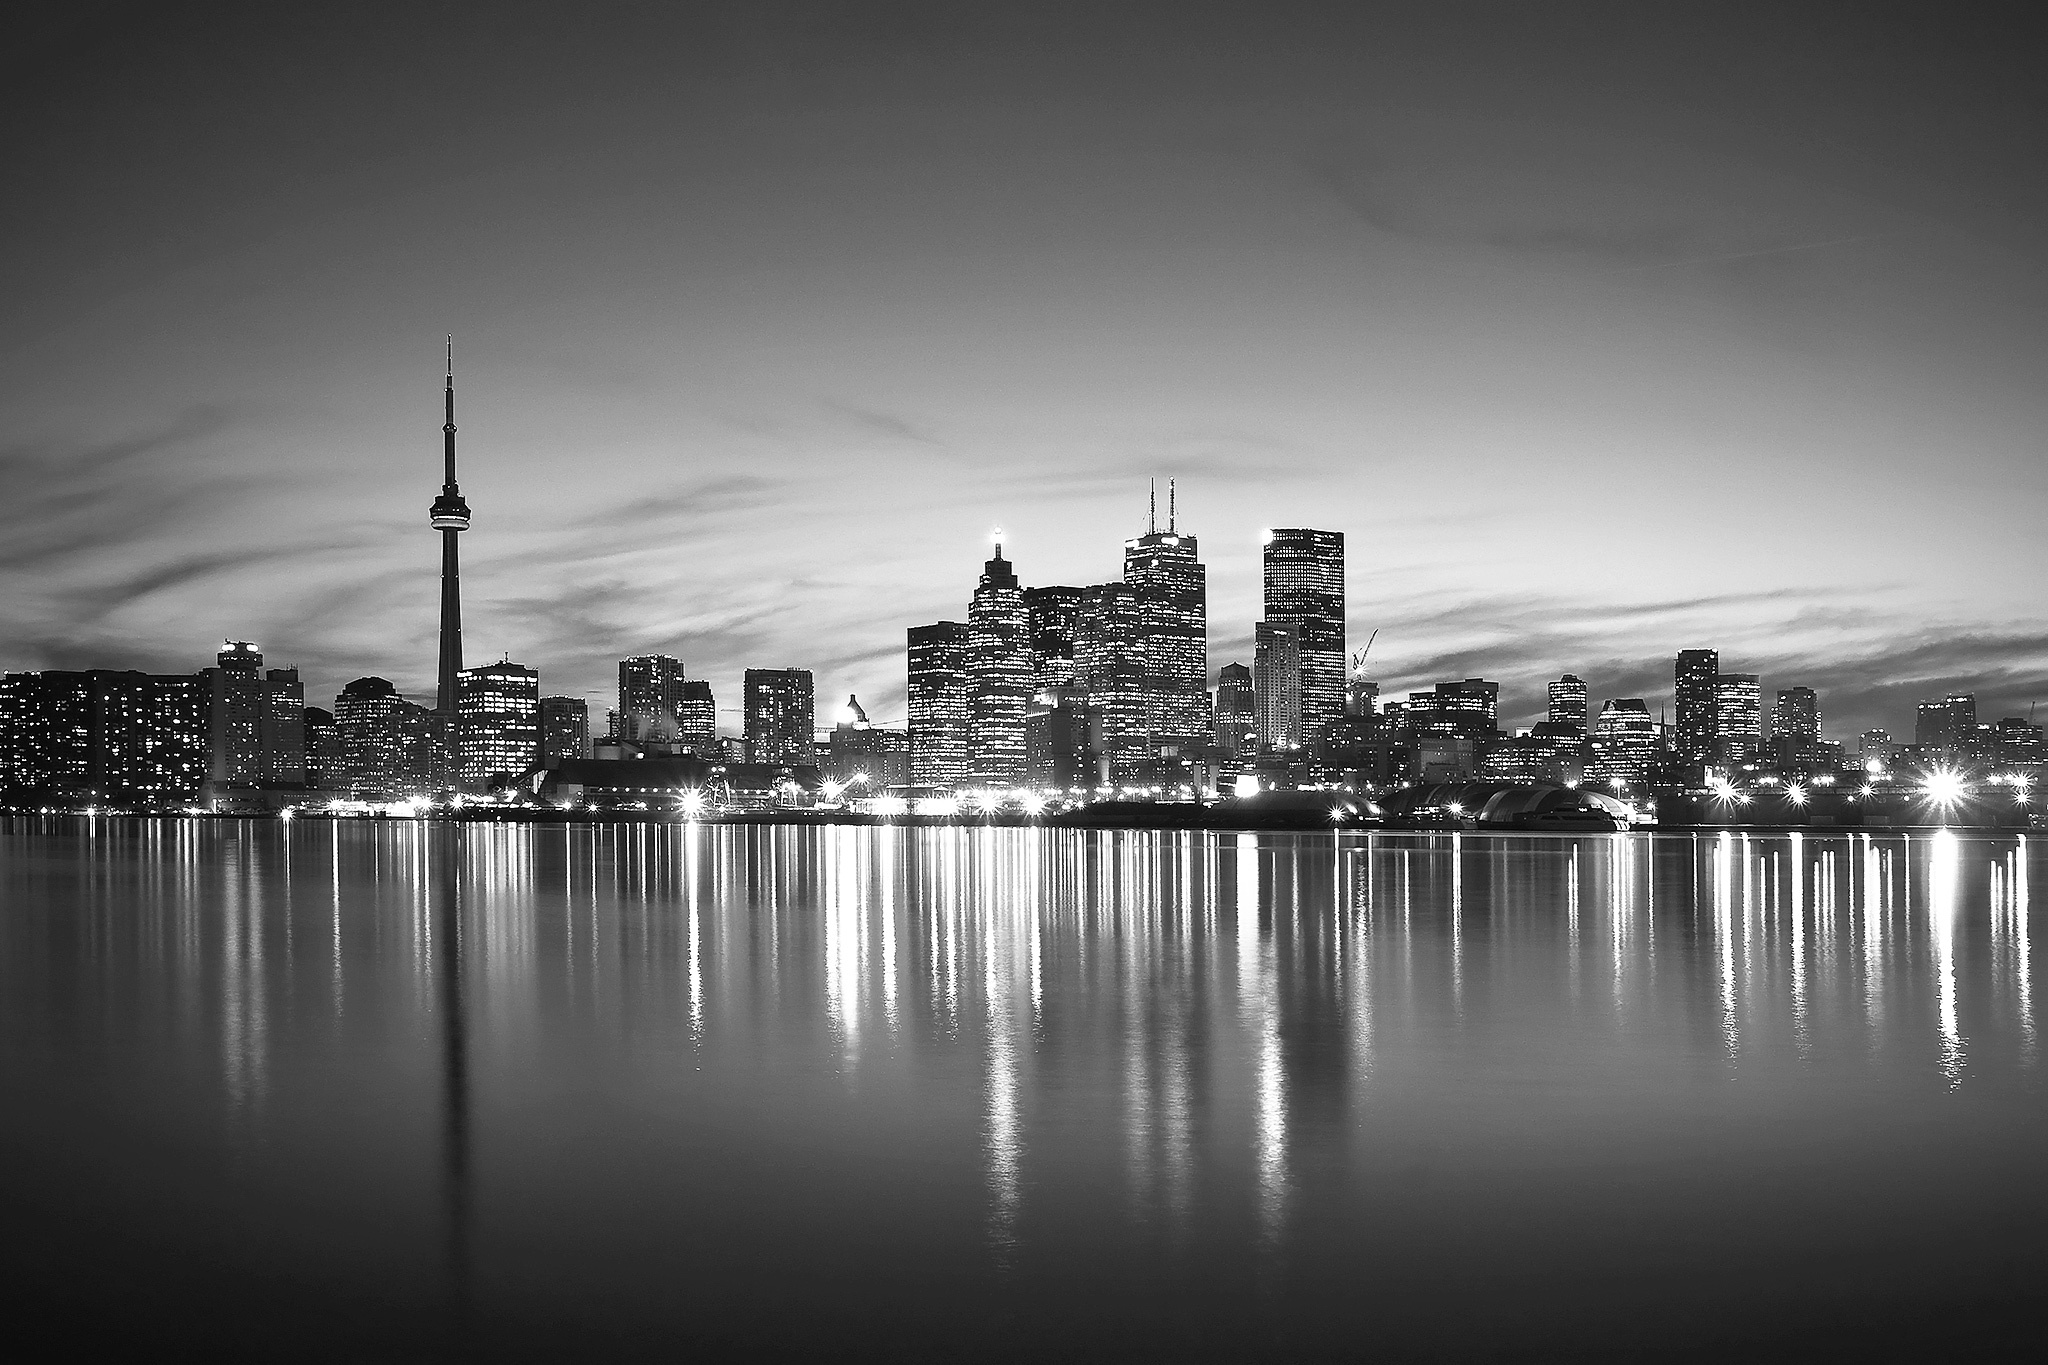 Explore Toronto with 500px Co-Founder Evgeny Tchebotarev in the Lead